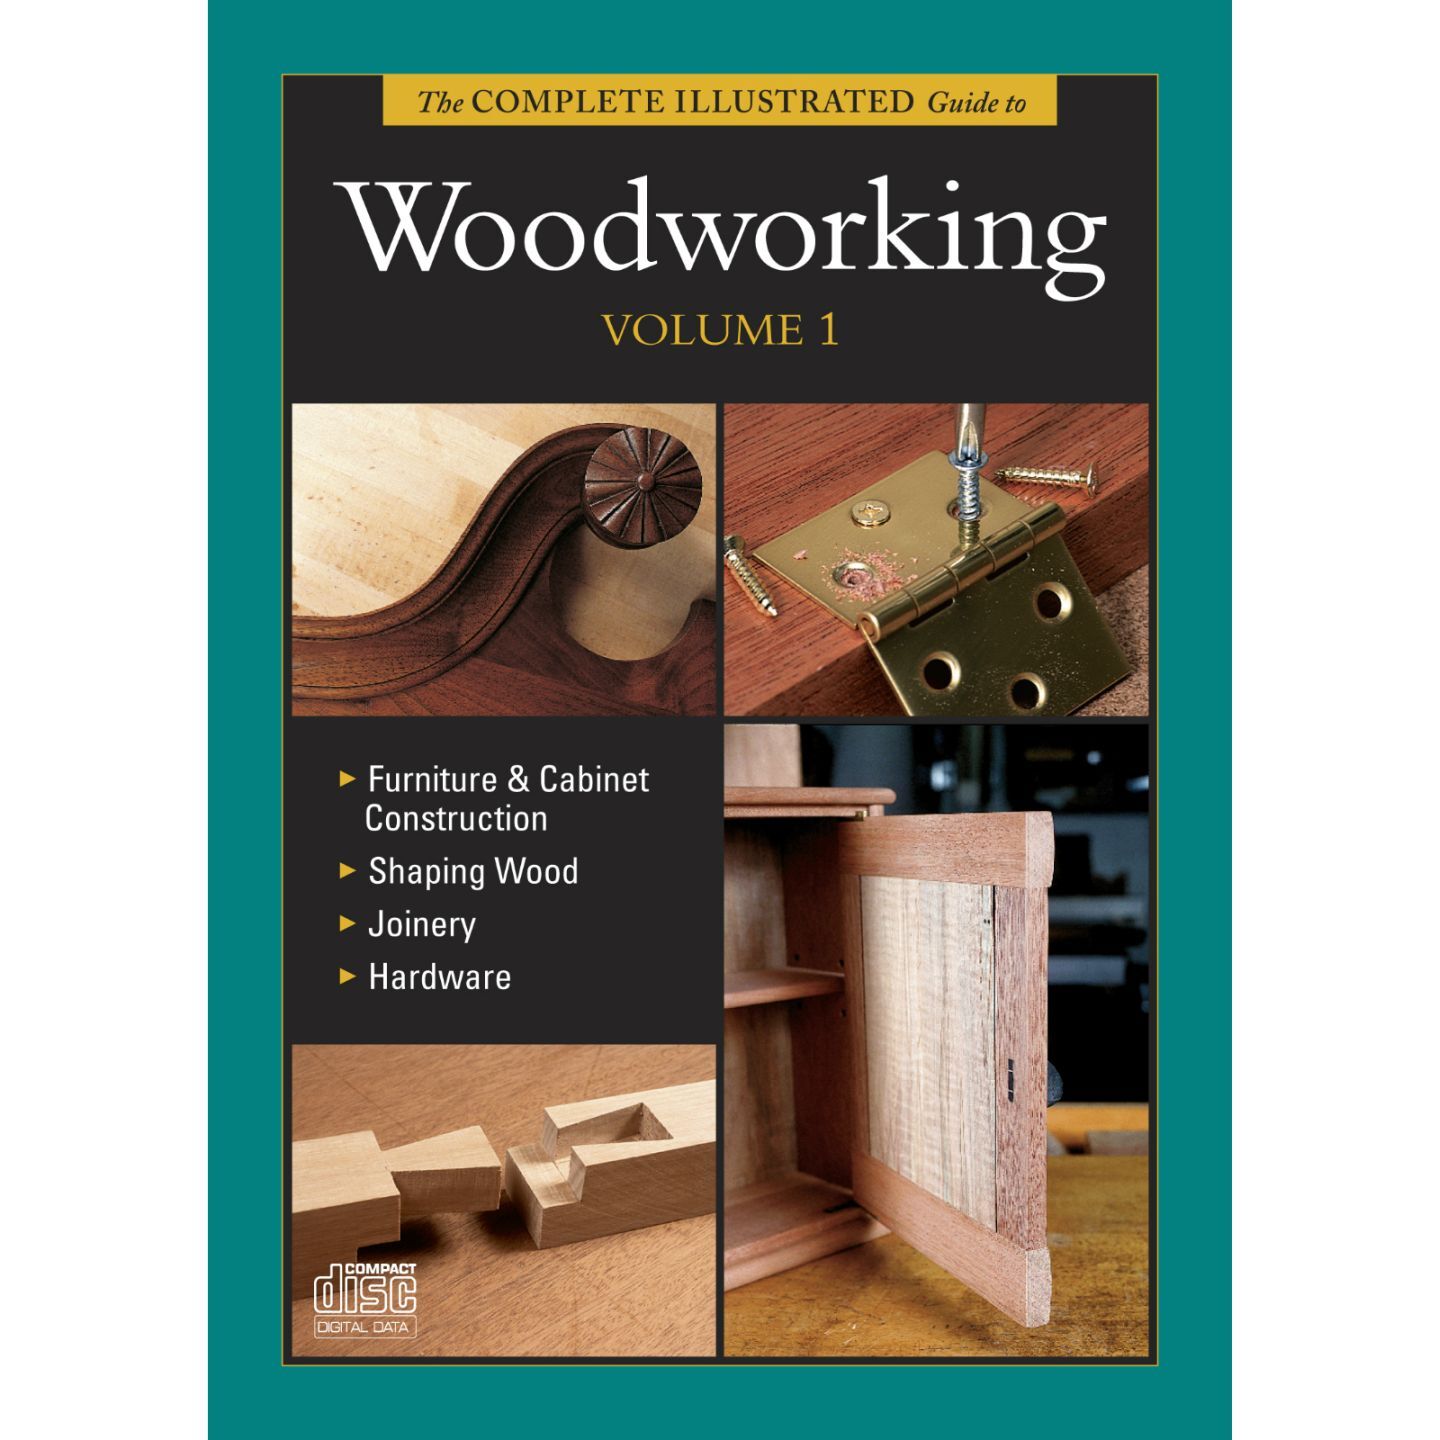 Complete Illustrated Guide to Woodworking Volume 1 - CD